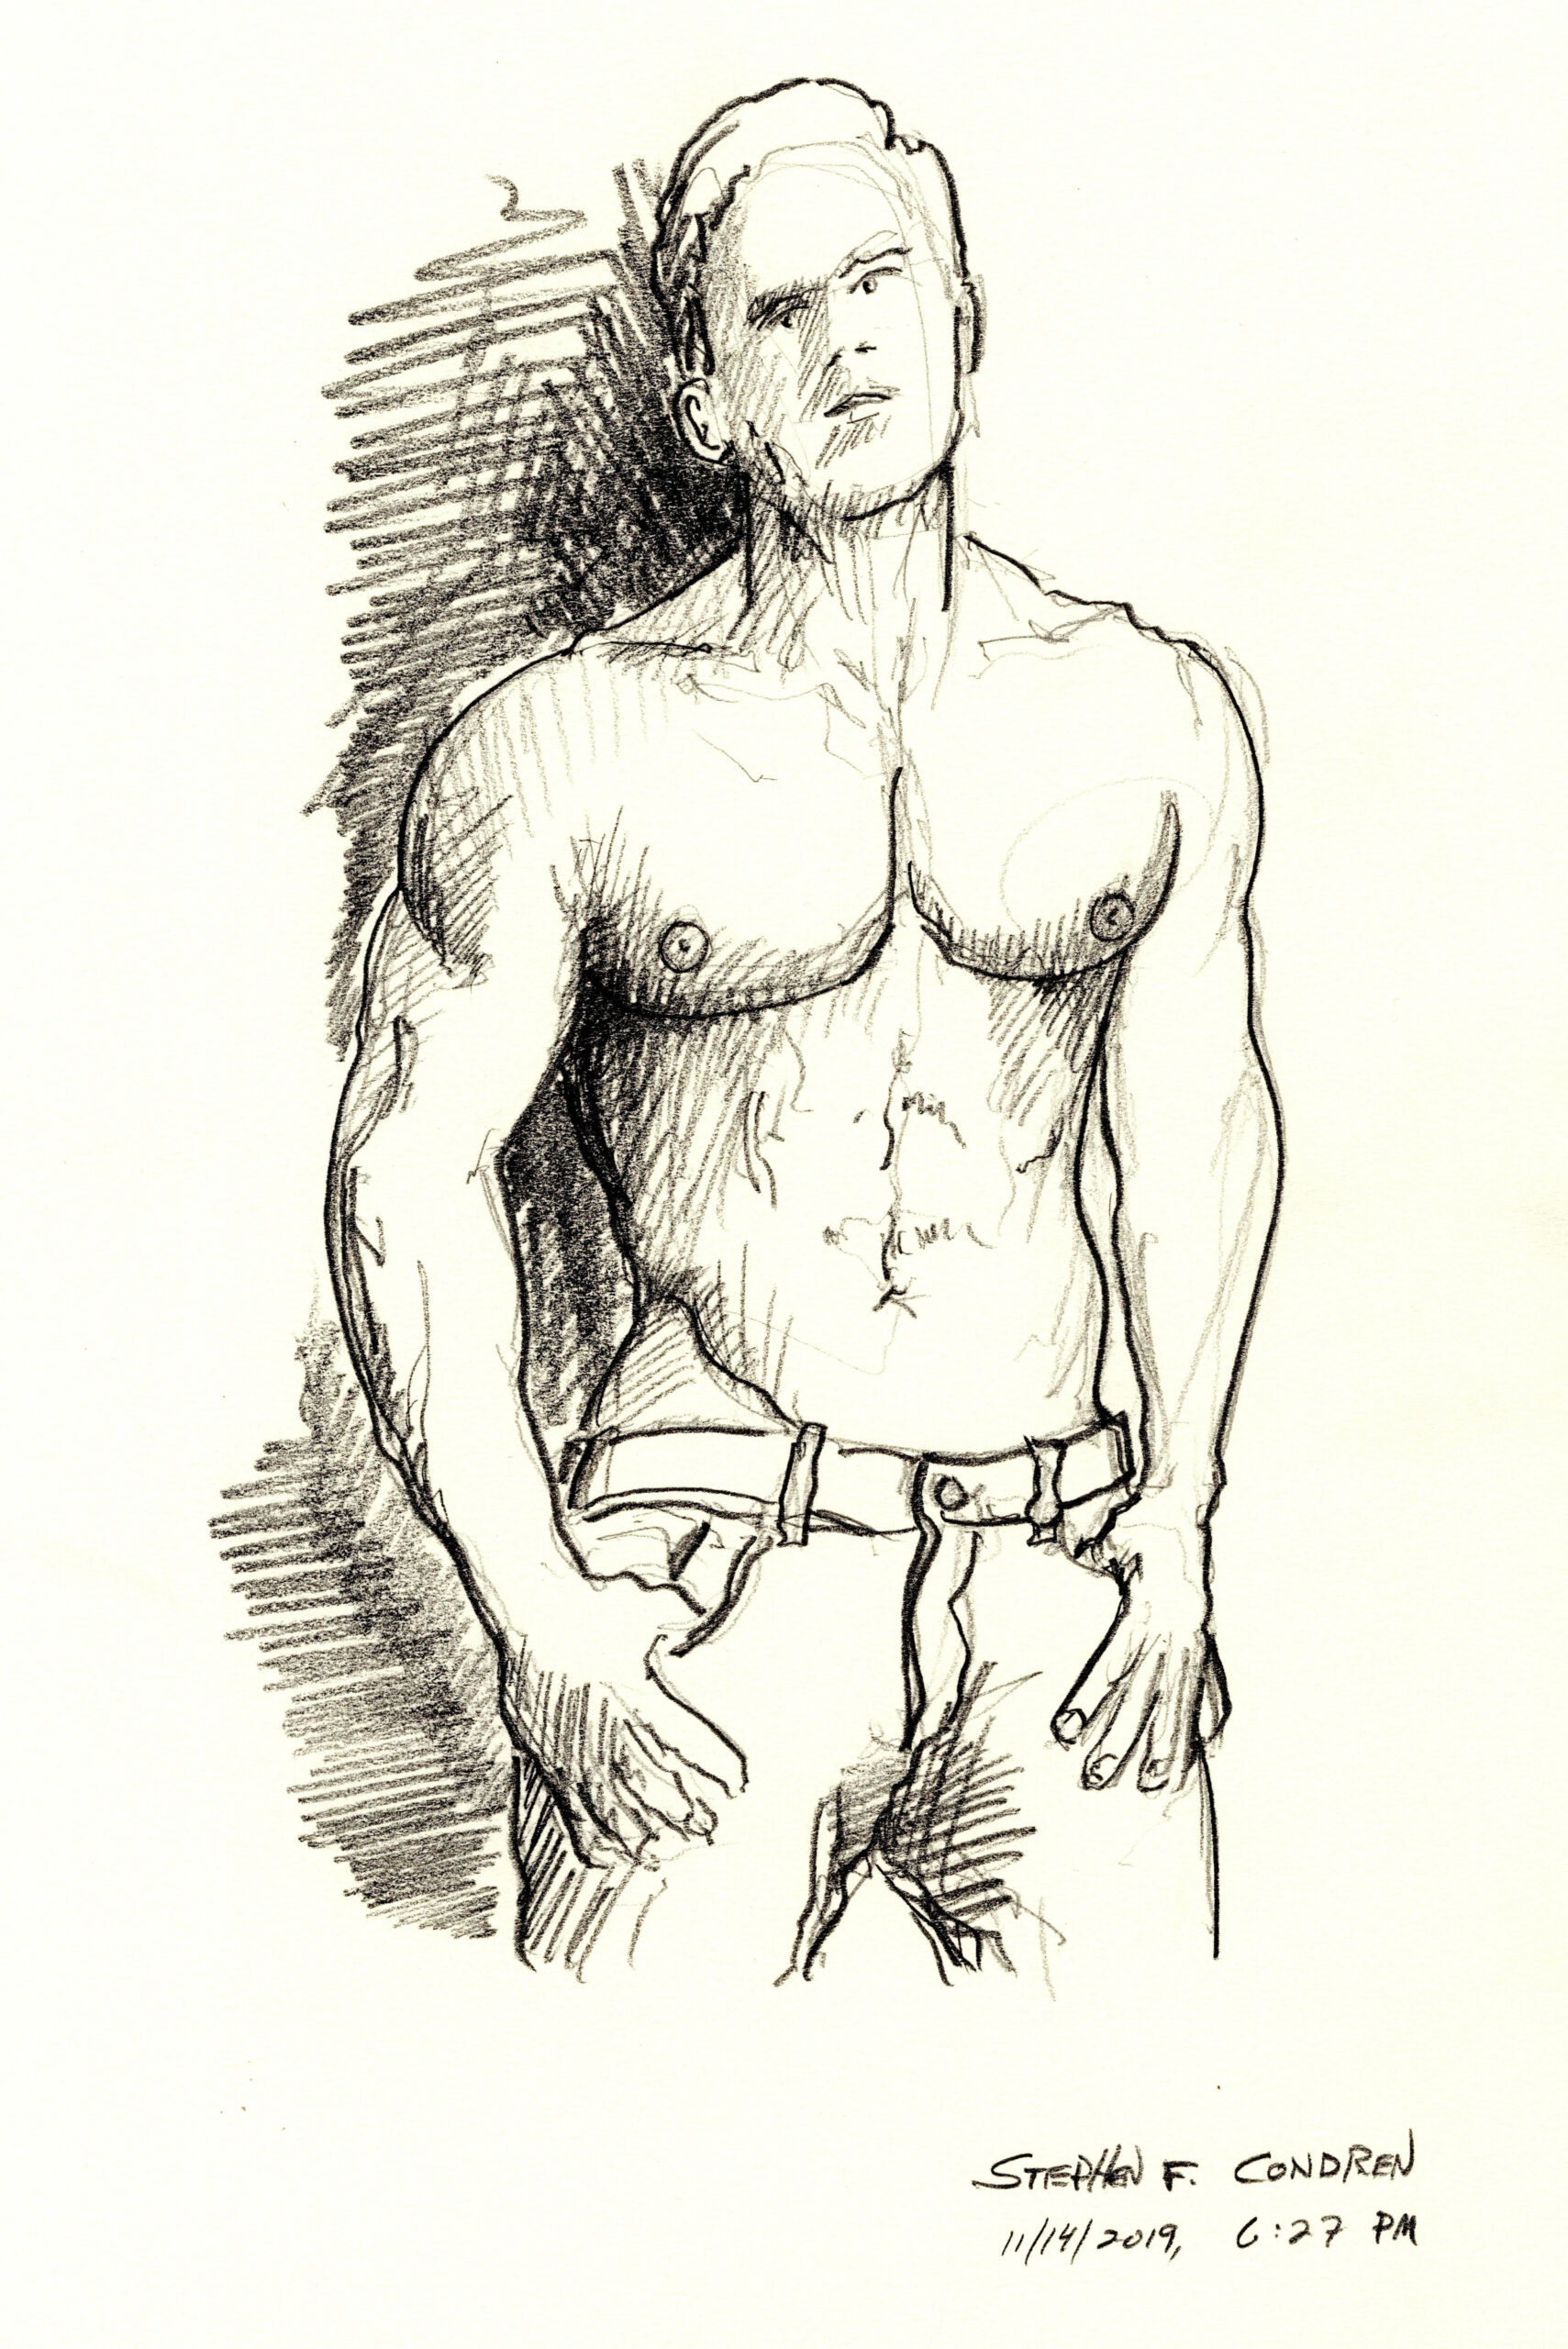 Pencil figure drawing of a hot shirtless male. He is cute and has the physique of a gymnast. His pecs are large and strong.